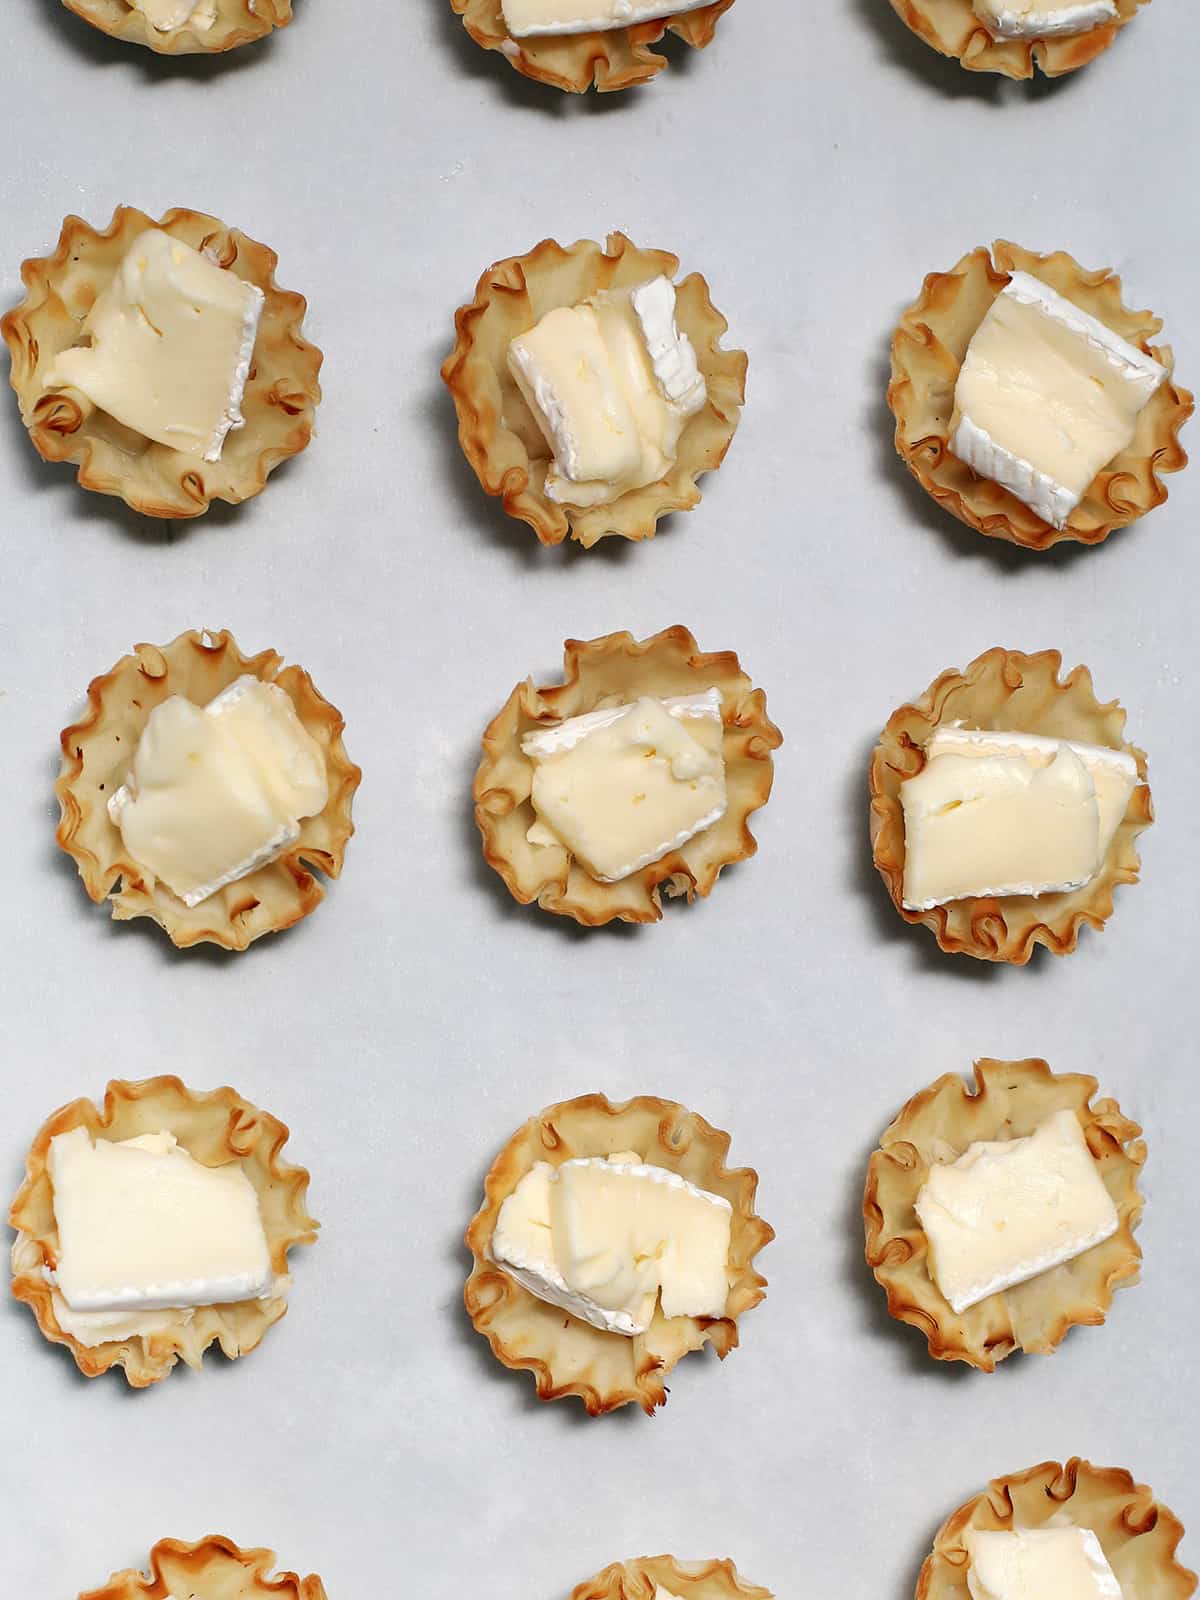 Brie cheese pieces in phyllo cups .